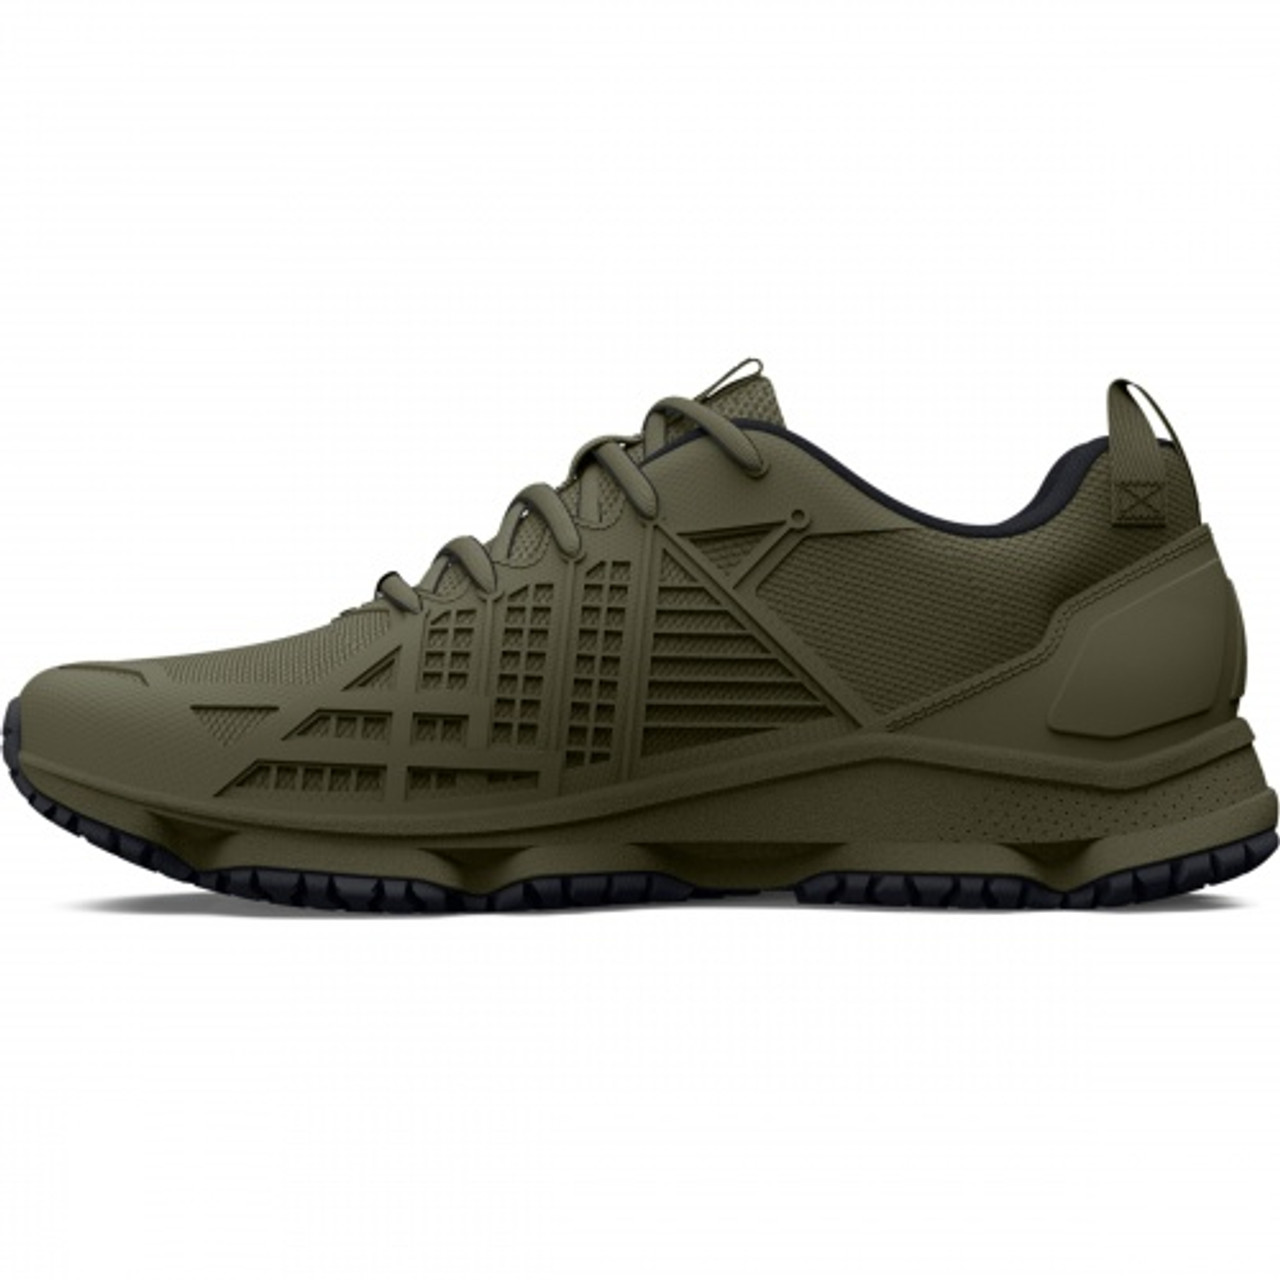 UA Men's Micro G Strikefast Tactical Hiking Athletic Shoes Marine